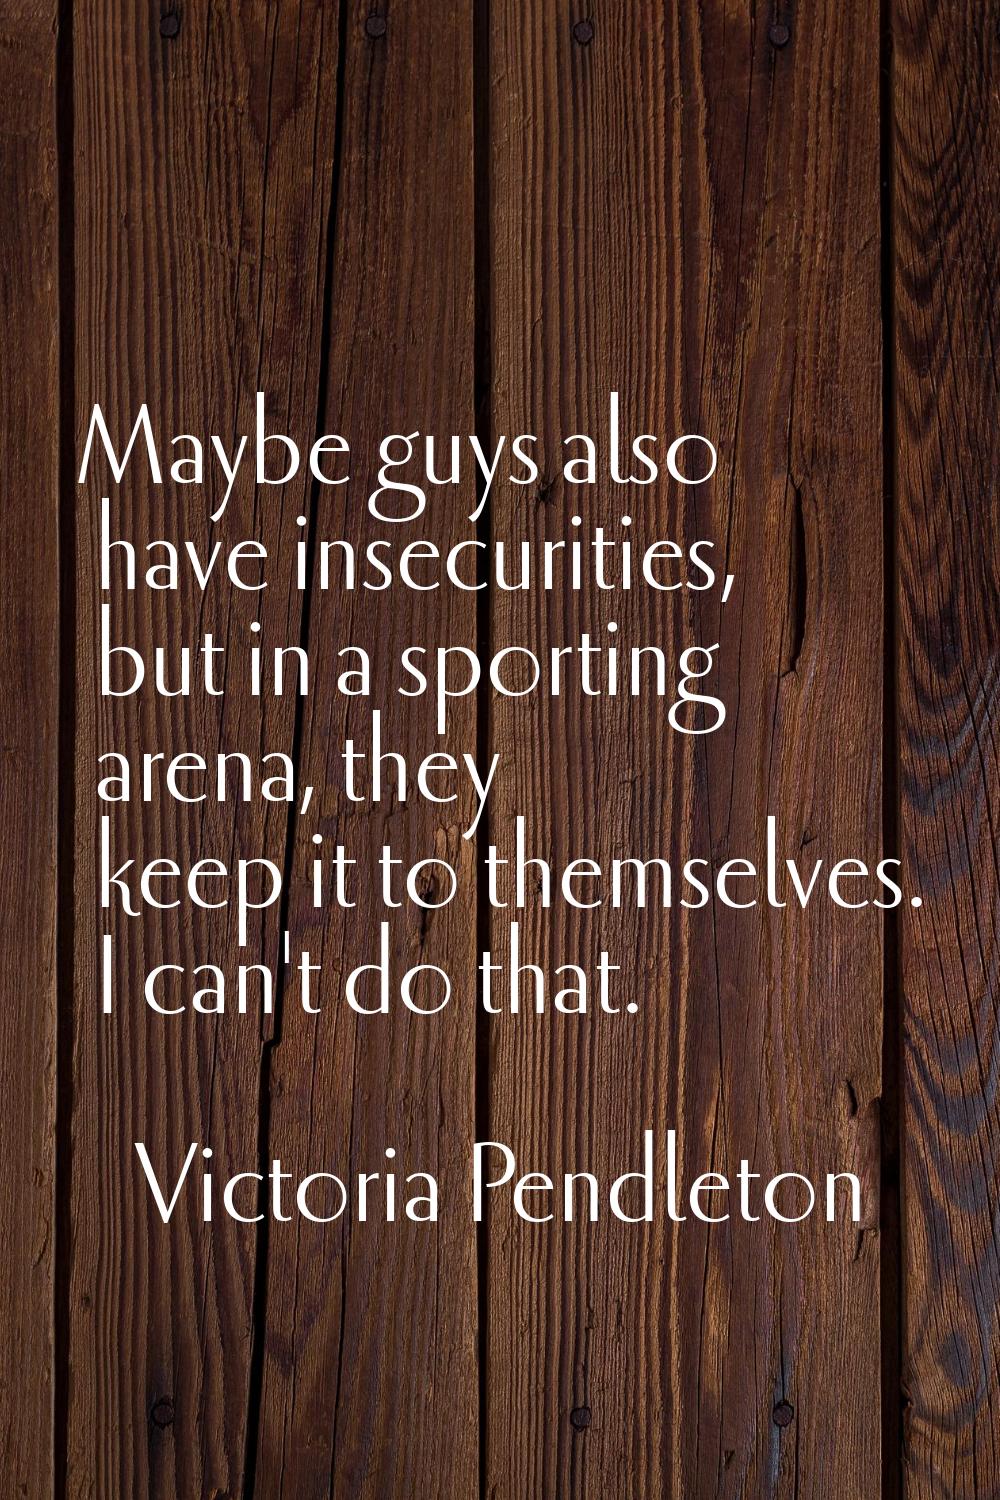 Maybe guys also have insecurities, but in a sporting arena, they keep it to themselves. I can't do 